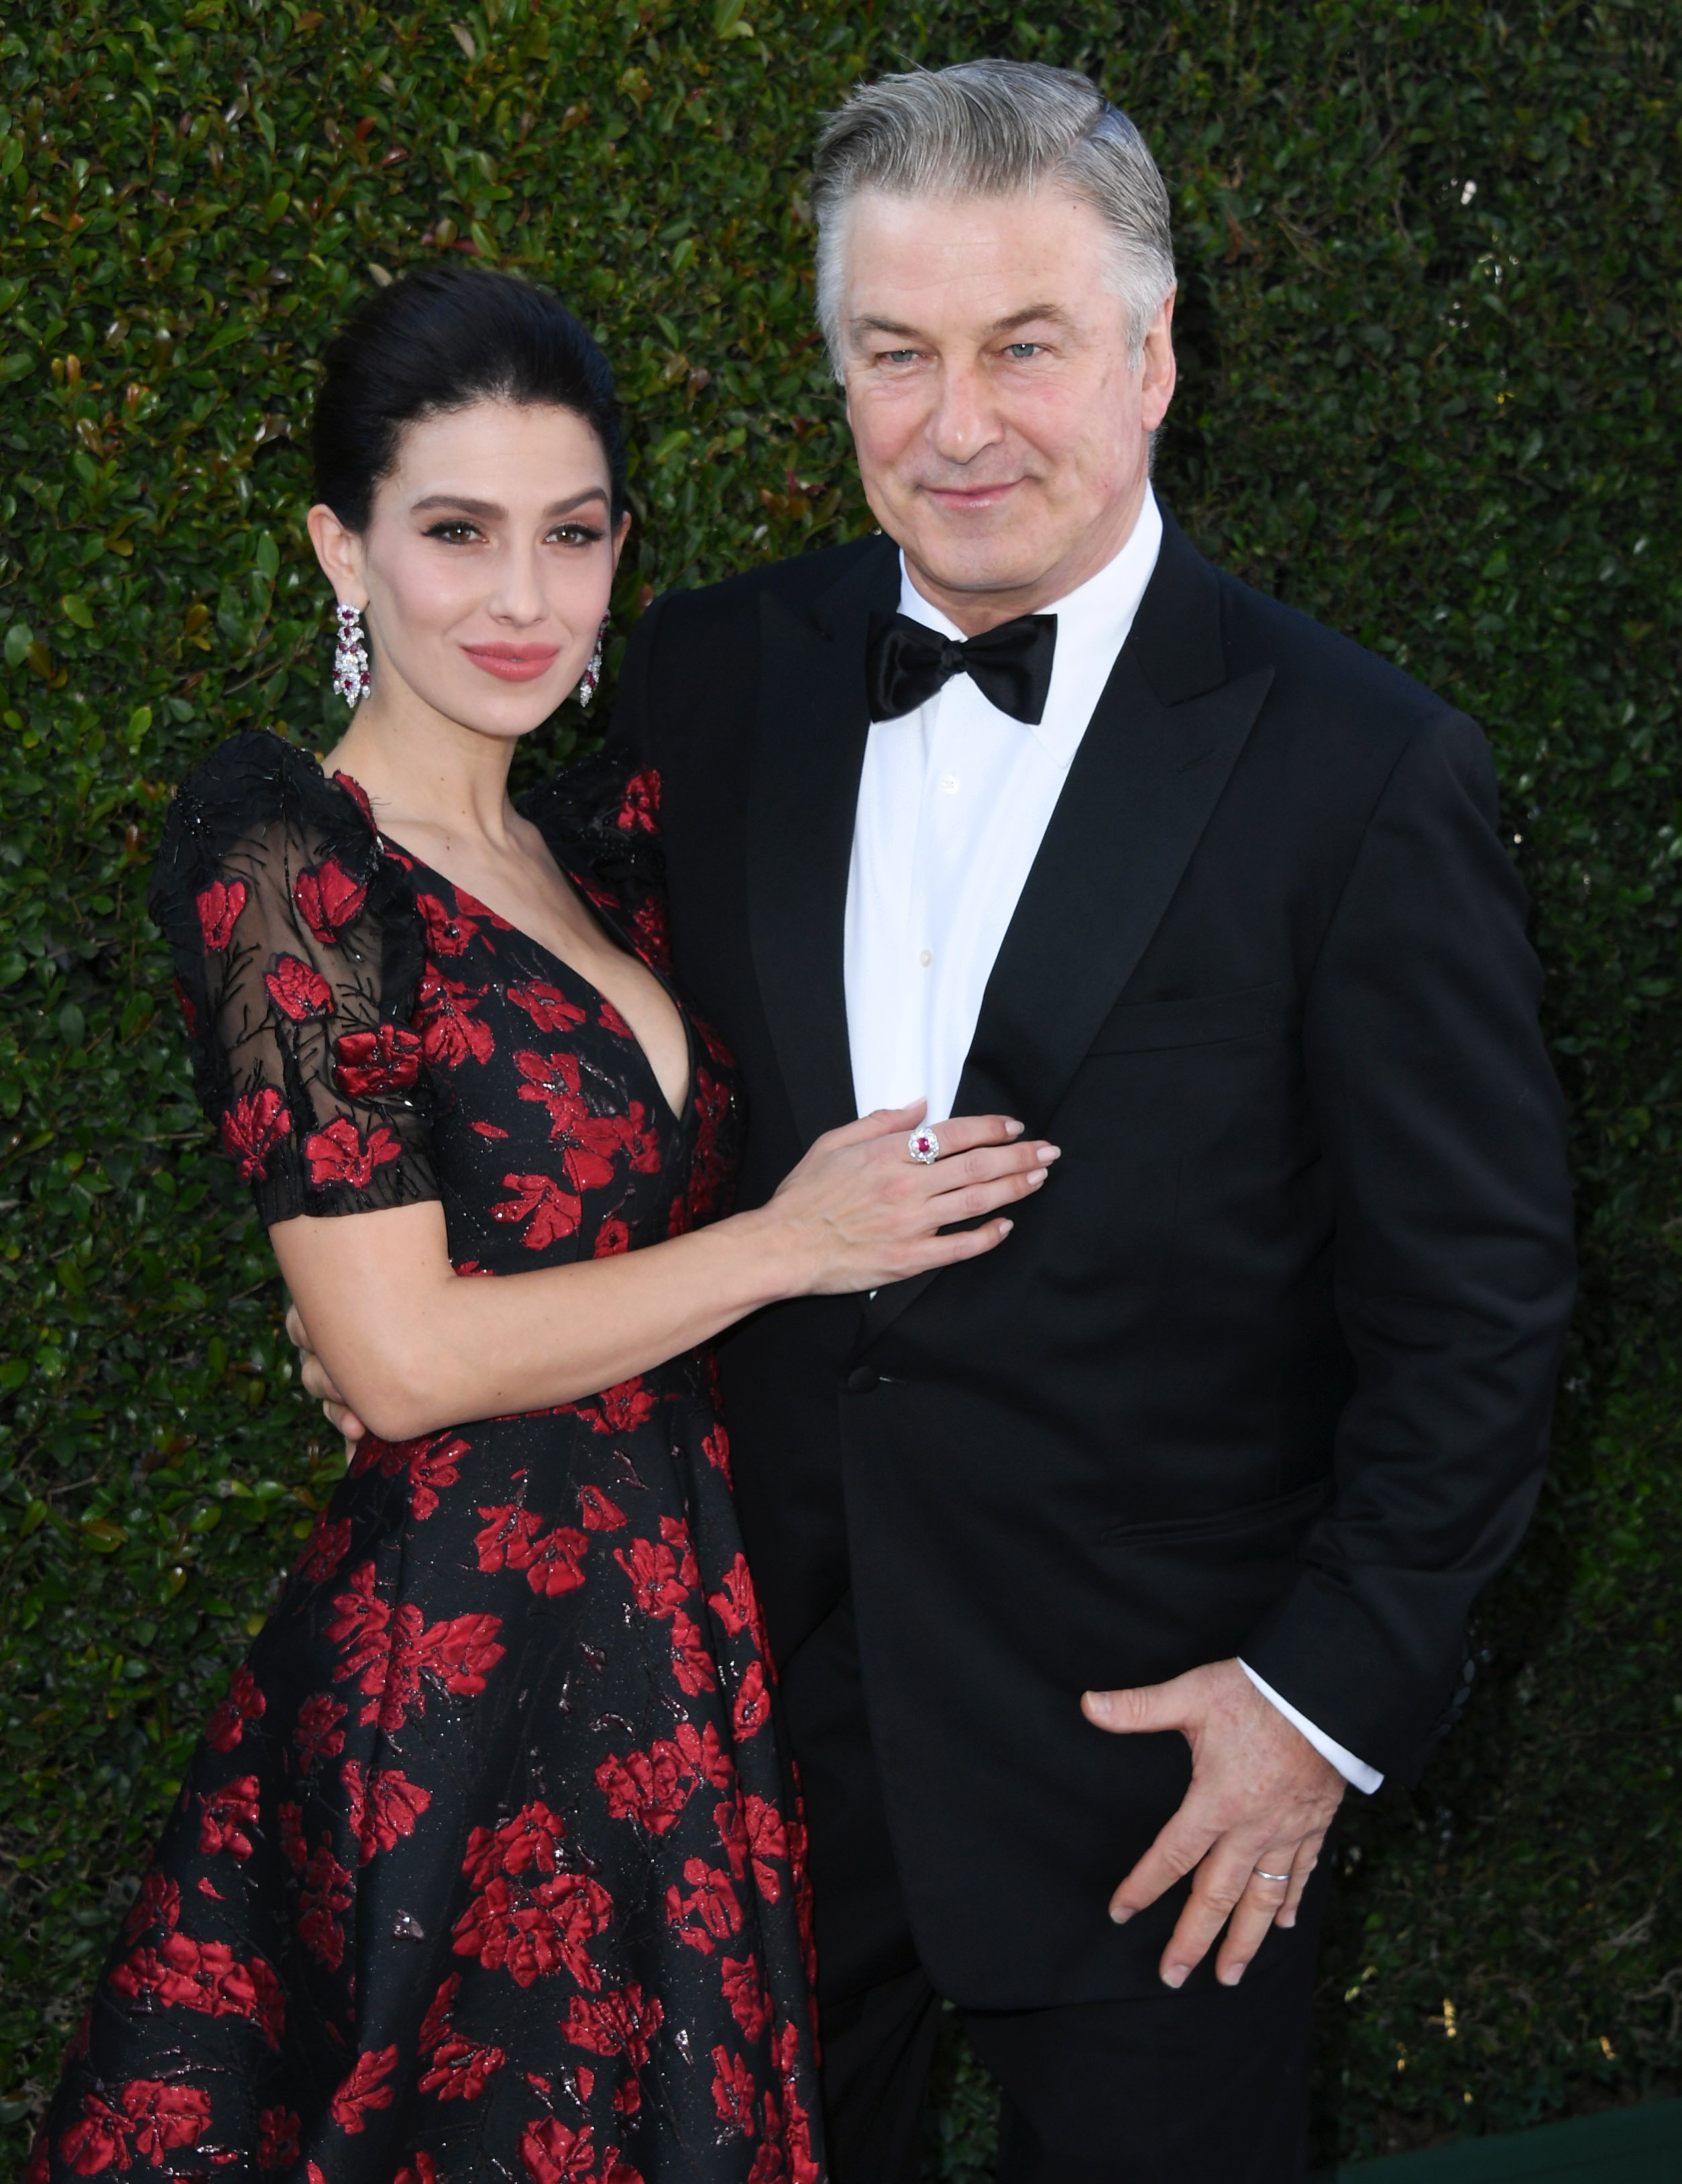 Hilaria Baldwin and Alec Baldwin attend 25th Annual Screen Actors Guild Awards at The Shrine Auditorium on January 27, 2019. | Photo: Getty Images